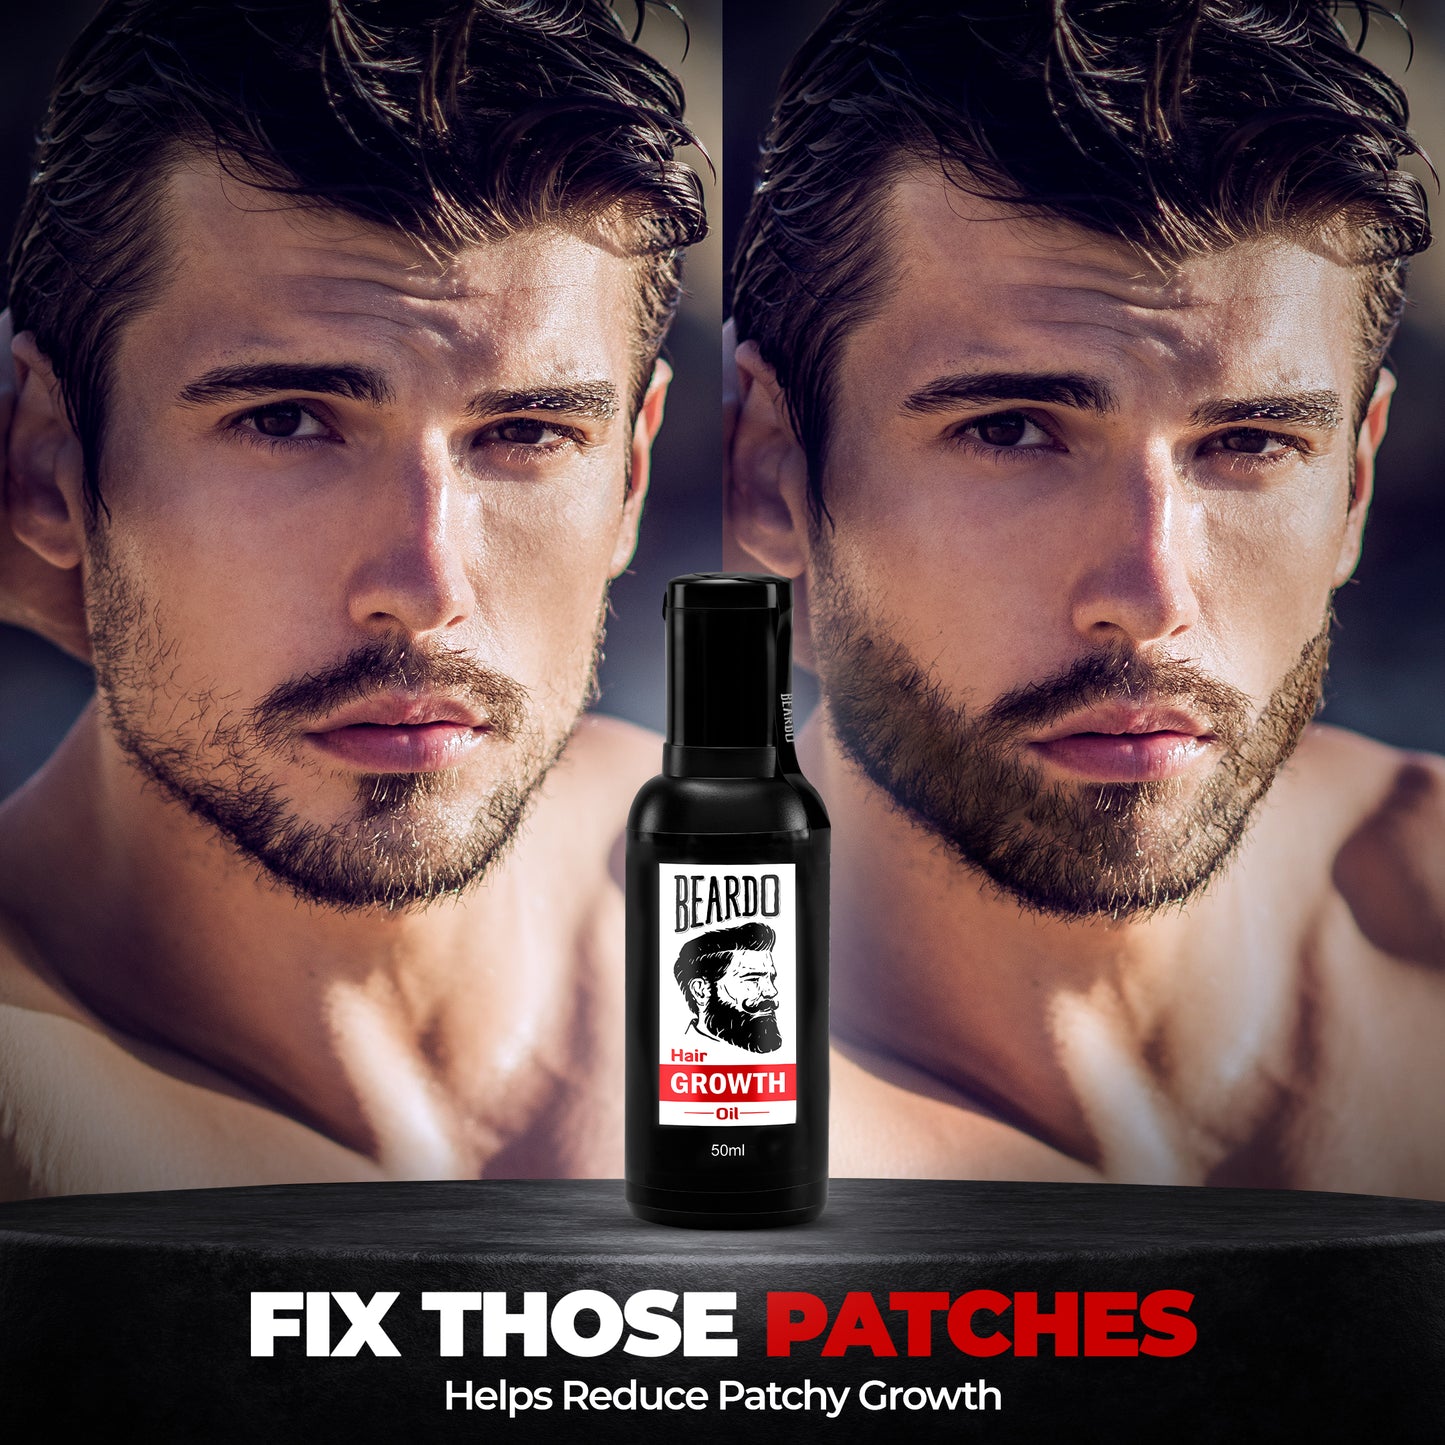 patchy growth, patchy beard solution, patchy beard